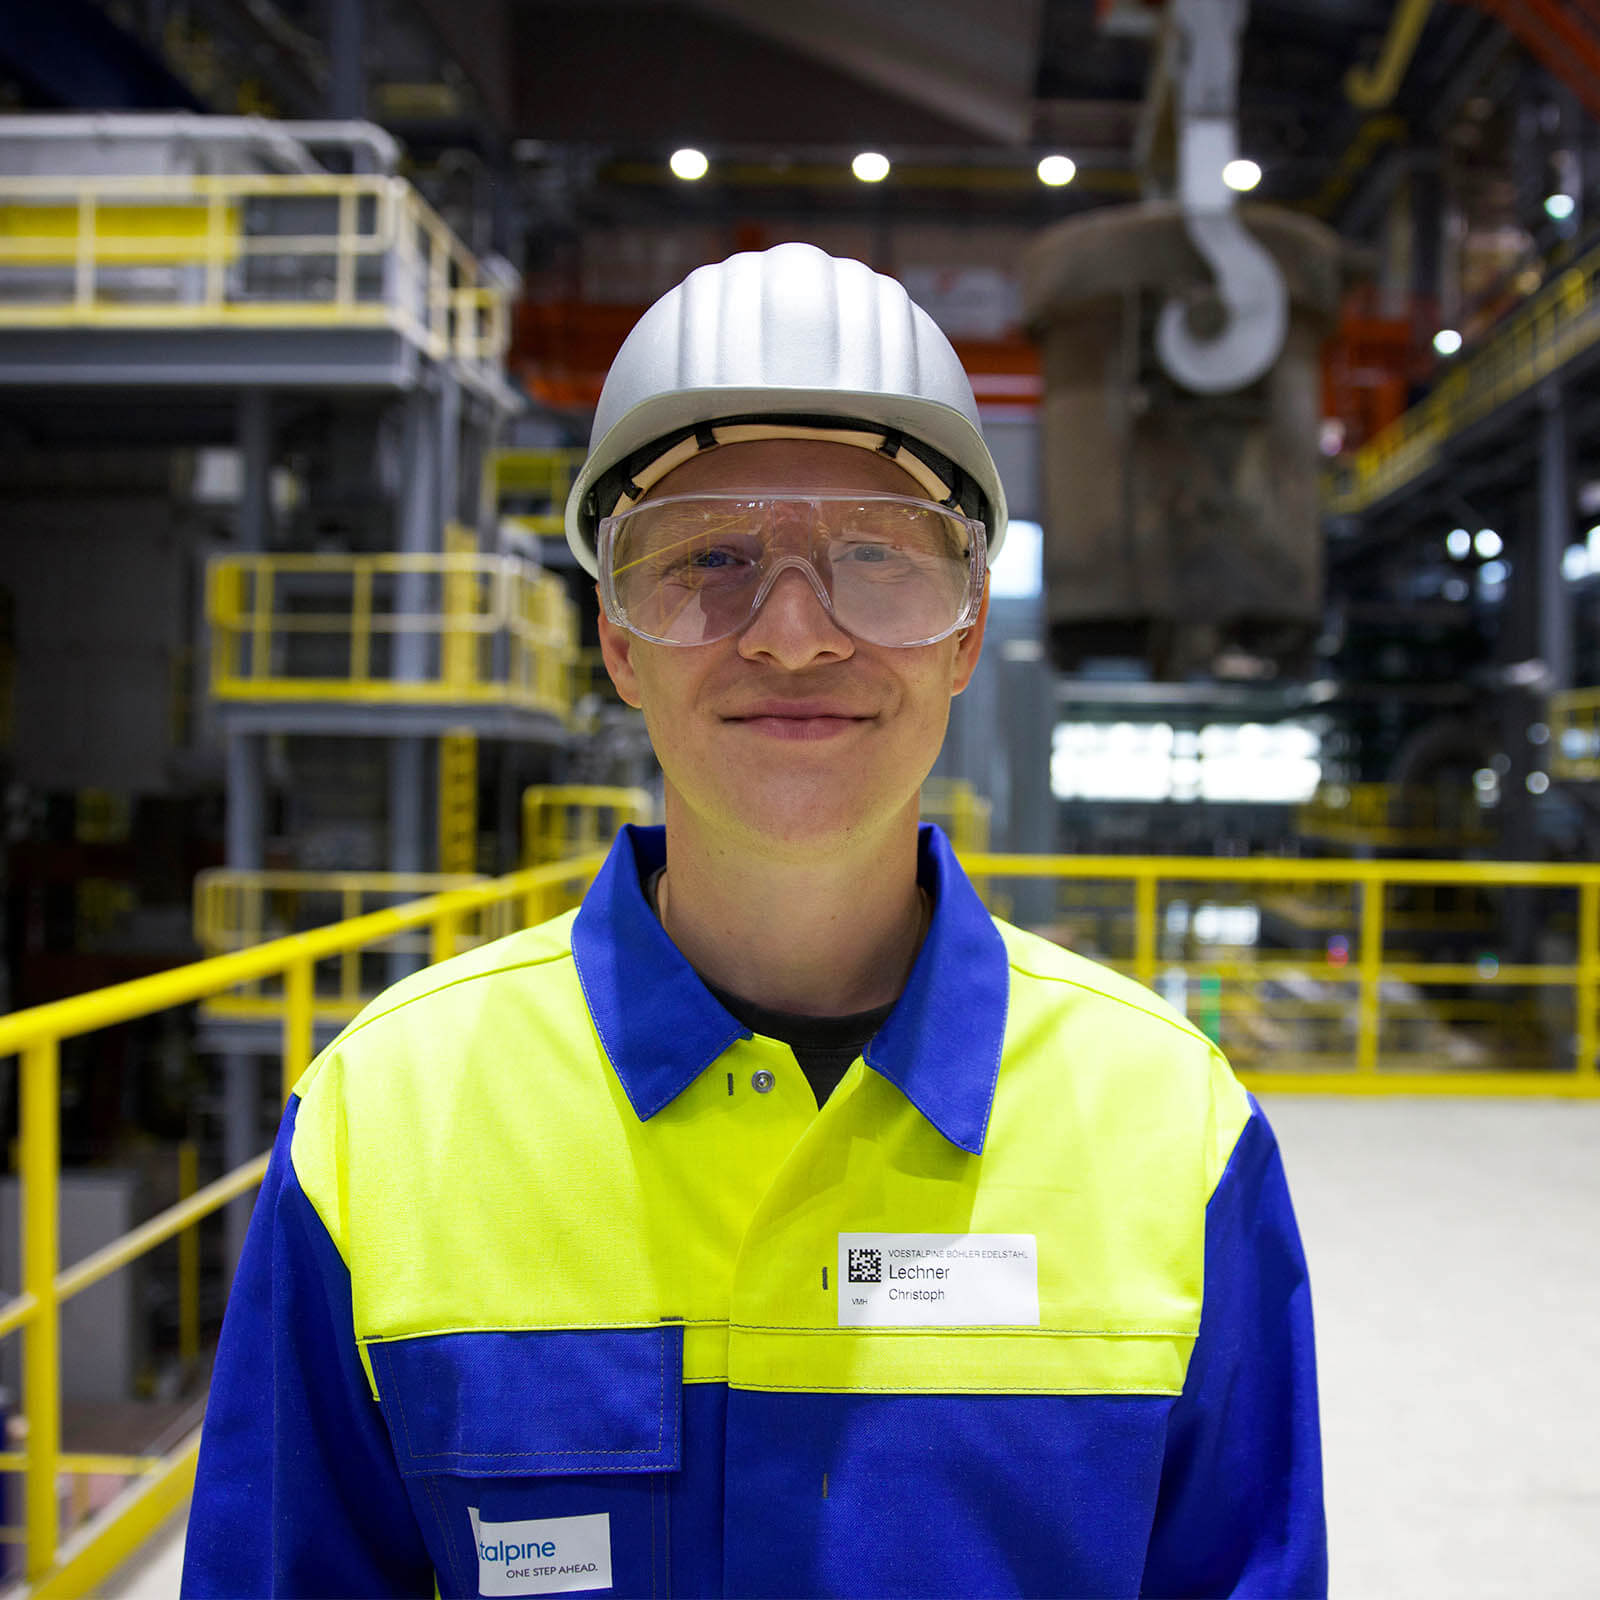 Christoph wears blue and yellow work clothes, safety goggles and a white work helmet and smiles into the camera on a platform in a factory hall